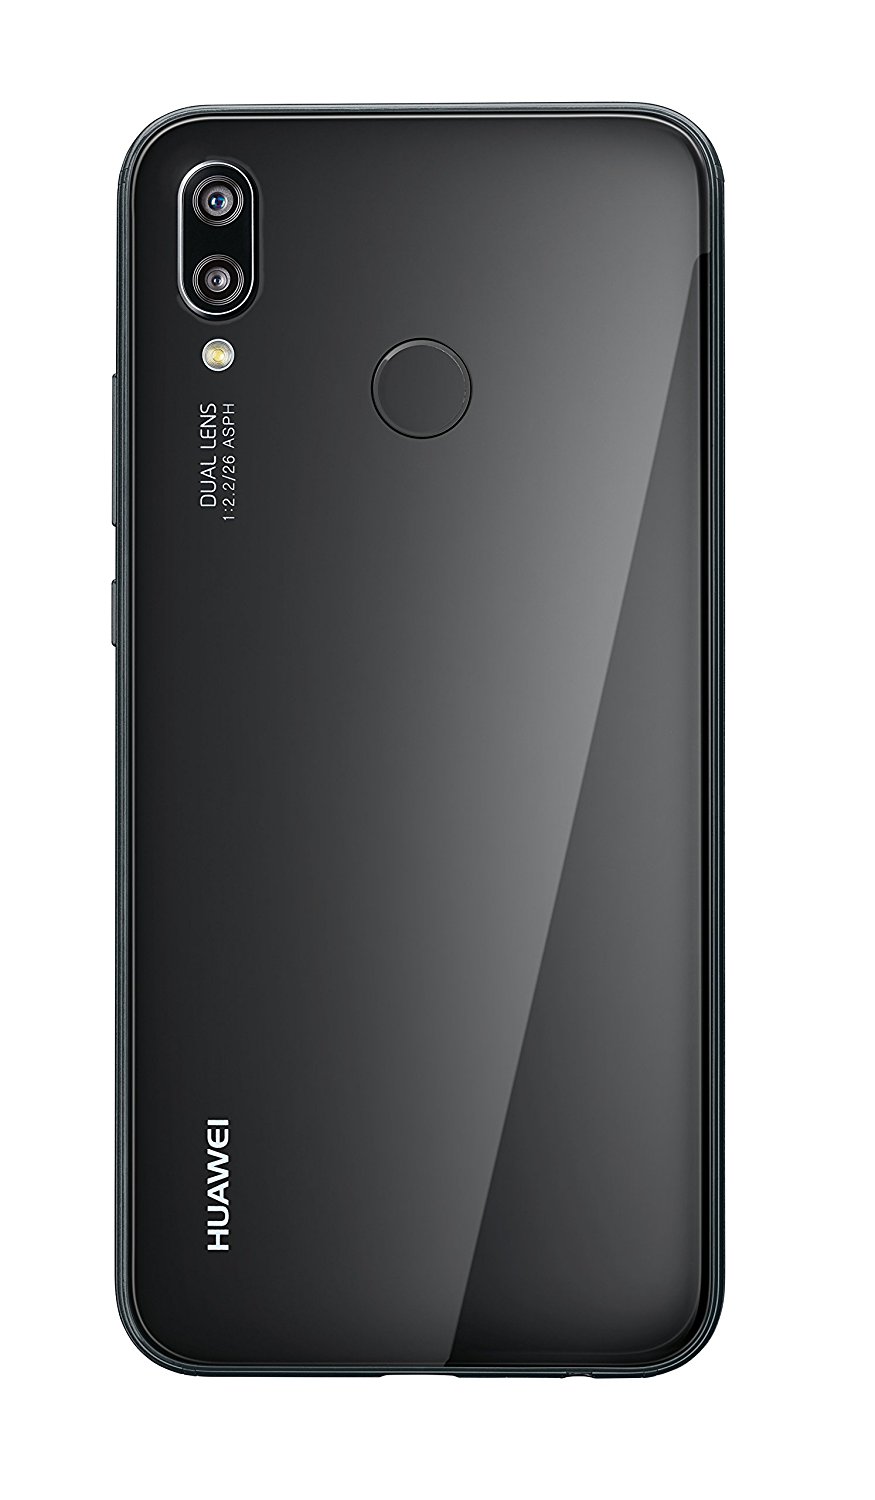 lite android p20 9 huawei for